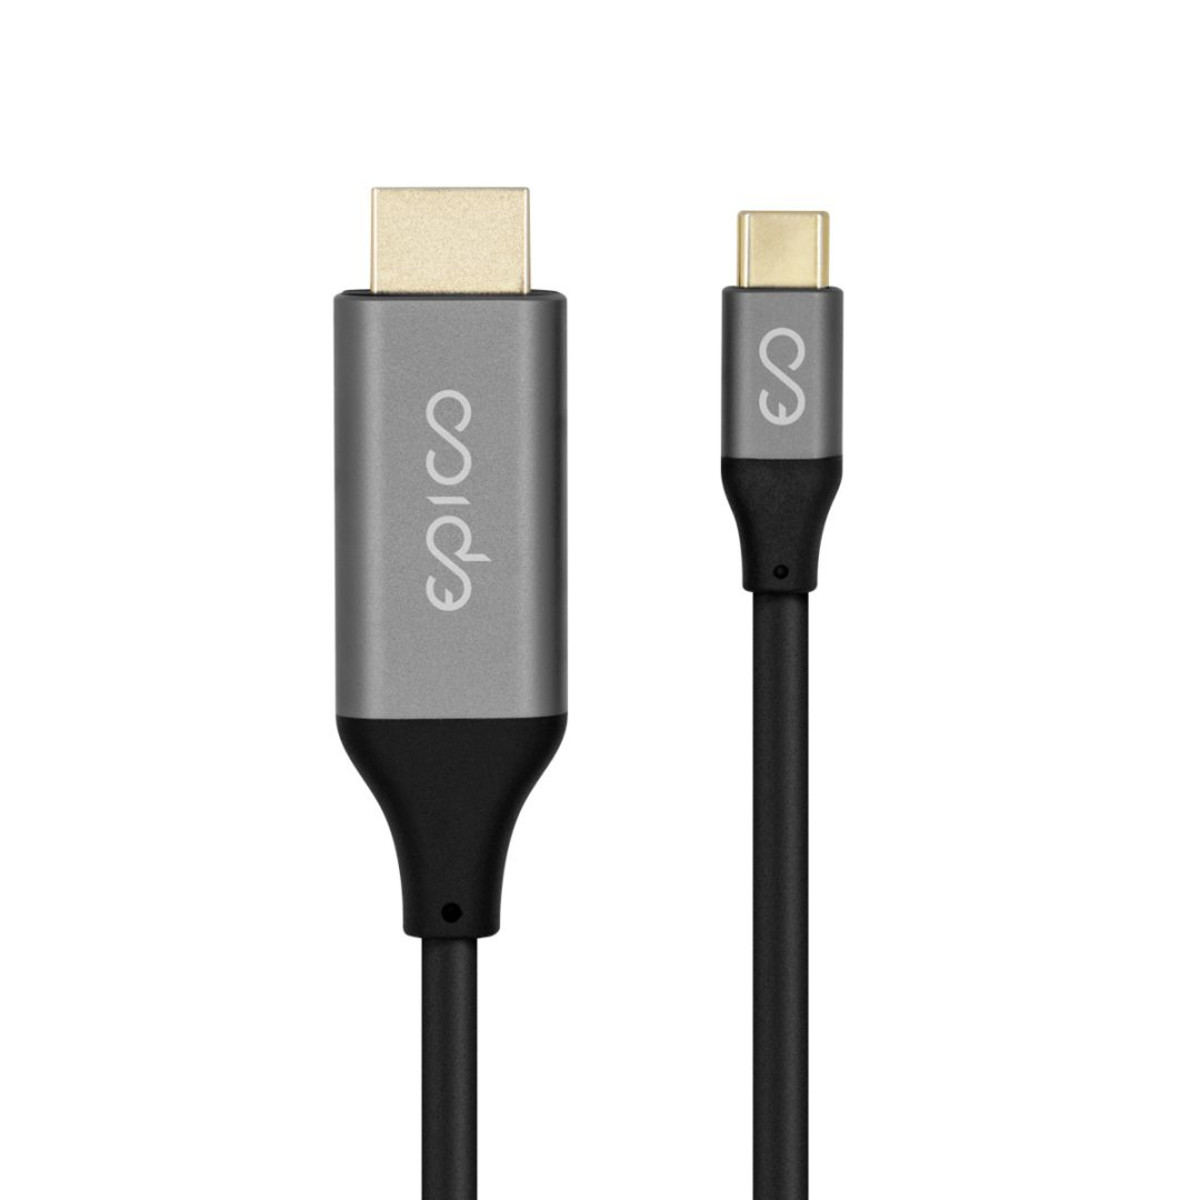 USB-C To HDMI Cable 1.8m - Grey